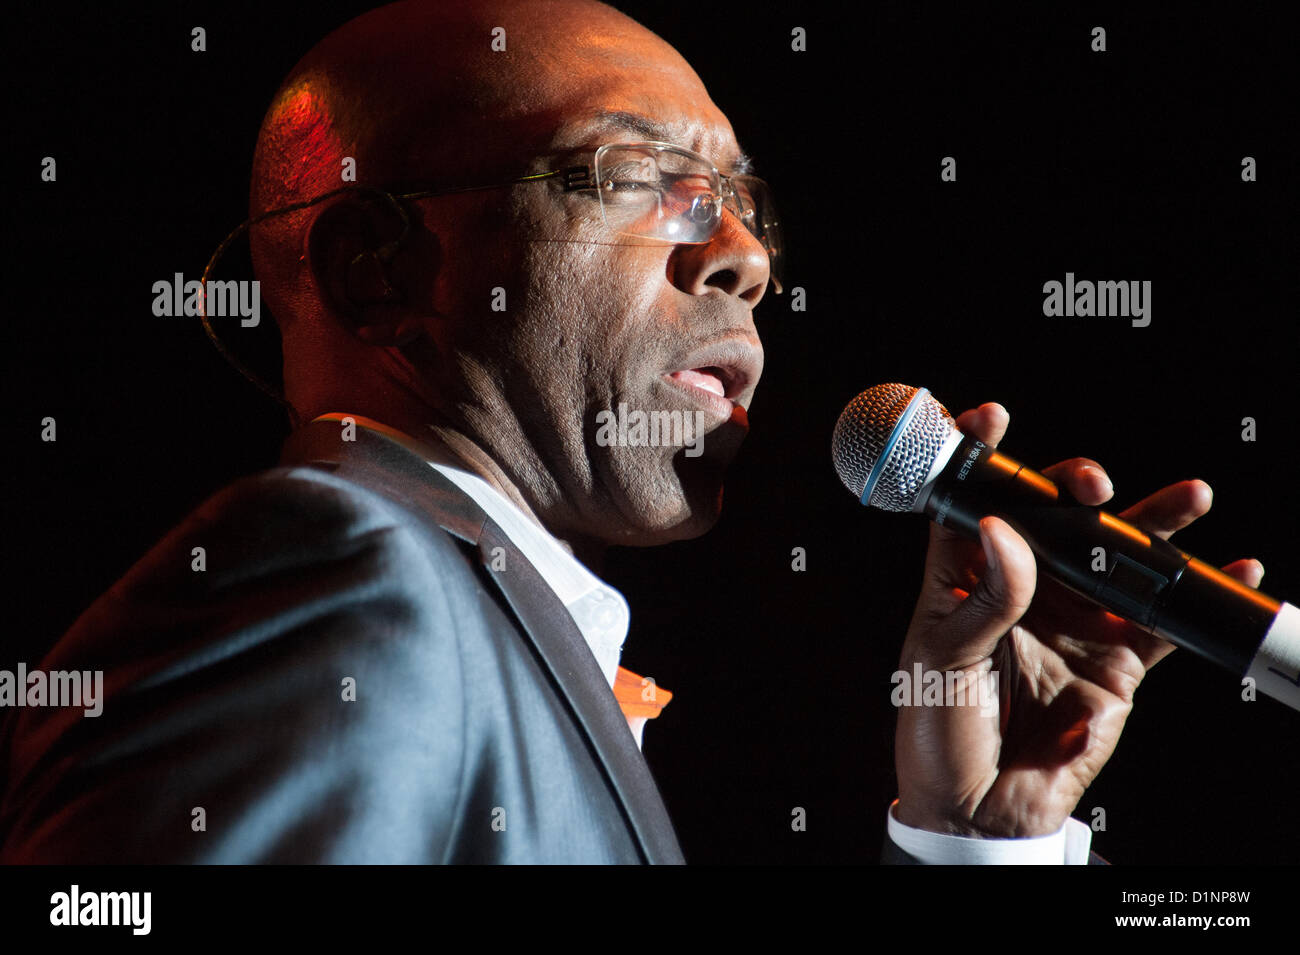 LINCOLN, CA - December 31: Larry Braggs with Tower of Power brings in the New Year at Thunder Valley Casino Resort in Lincoln, California on December 31, 2012 Stock Photo